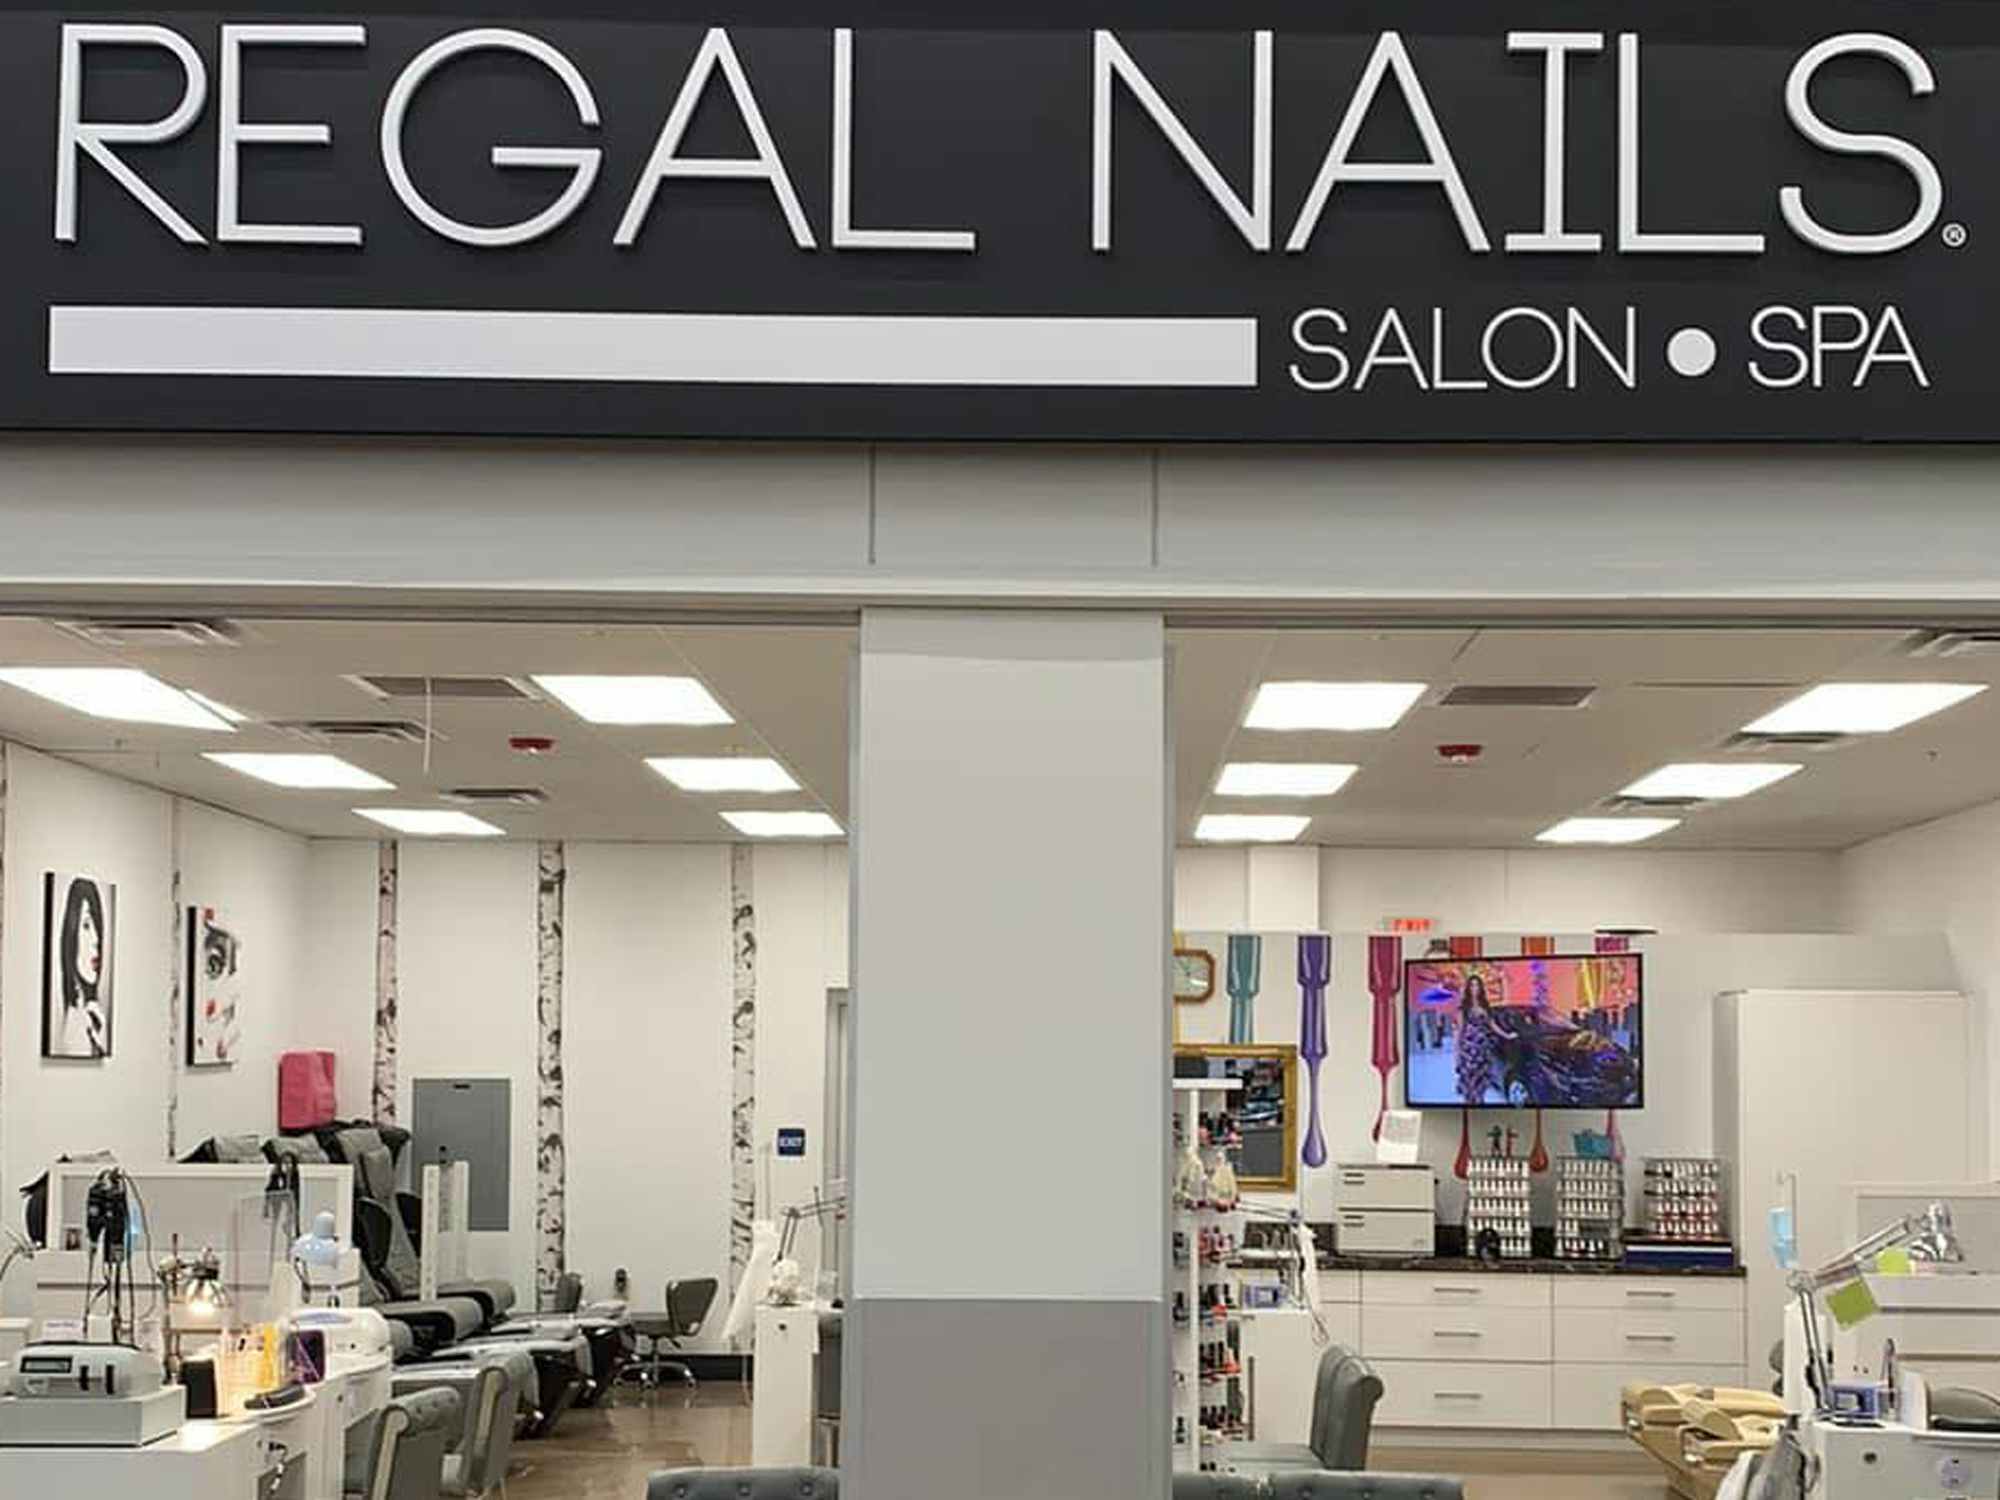 You Can Get Your Nails Done At Walmart Regal Nails 1681237432 1681237432 ?auto=format&fit=fill&q=25